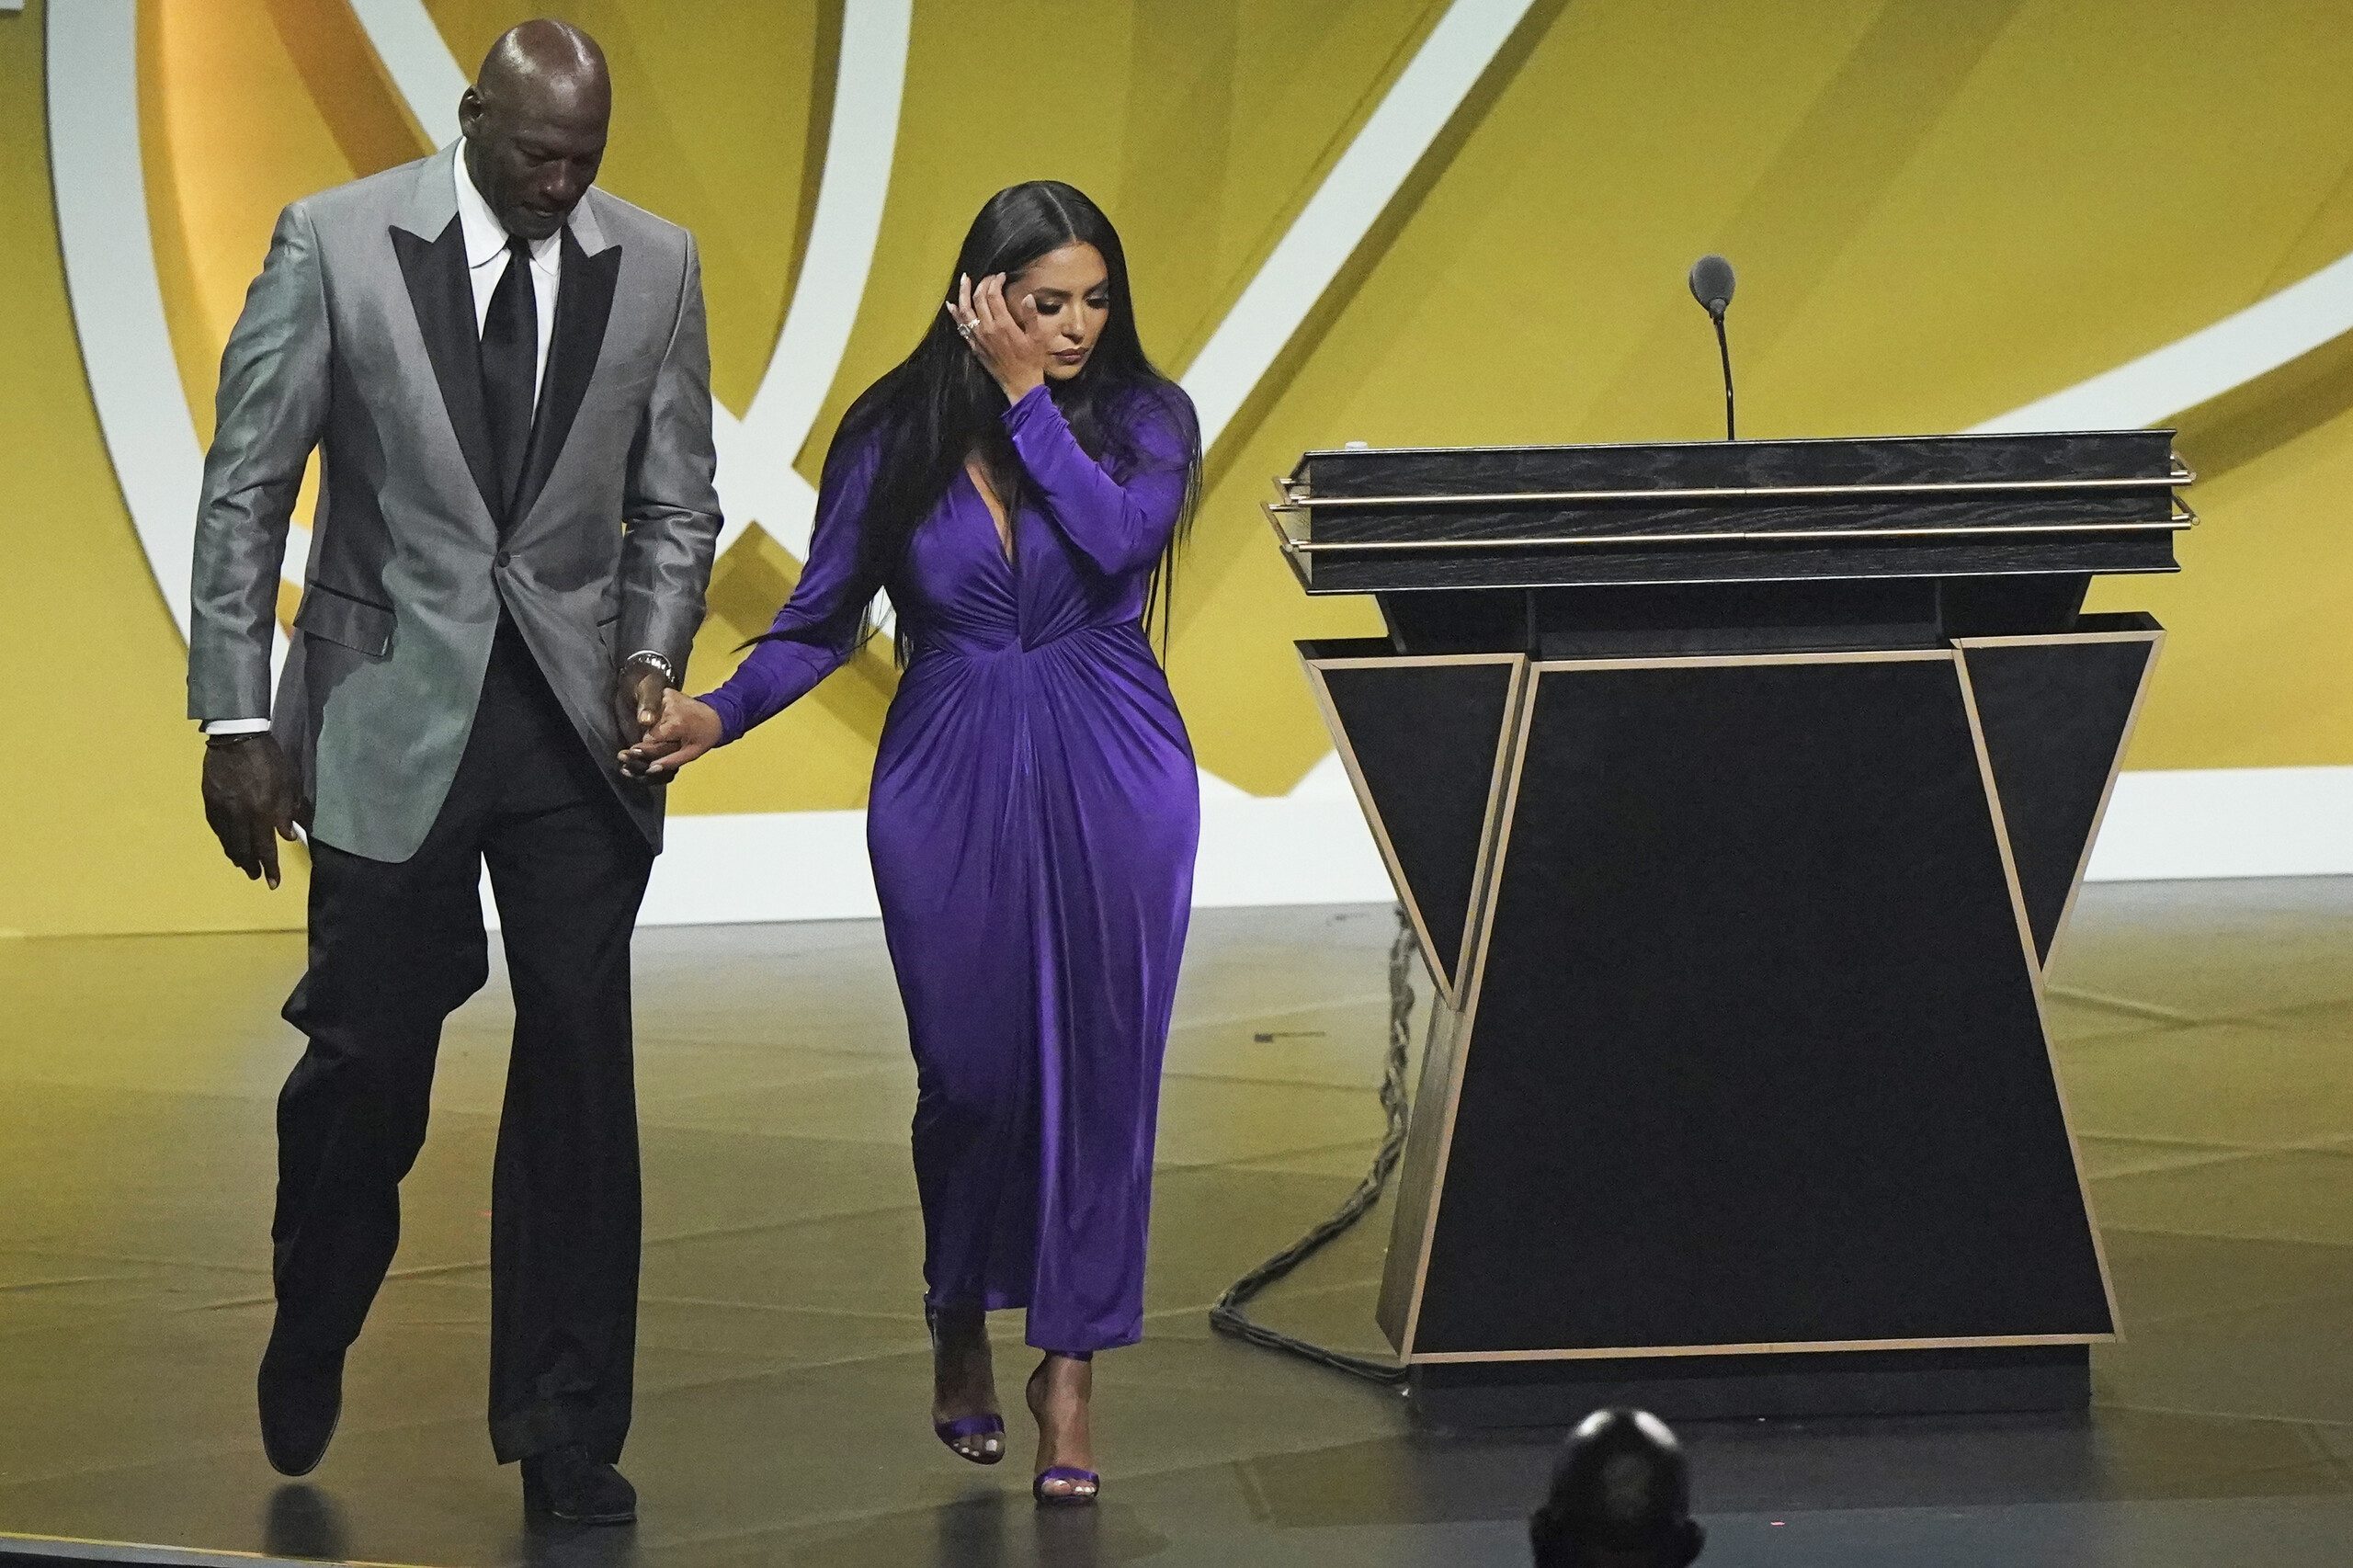 Kobe Bryant was inducted into the Hall of Fame, vanessa said affectionately: I wish my husband could witness it on the spot